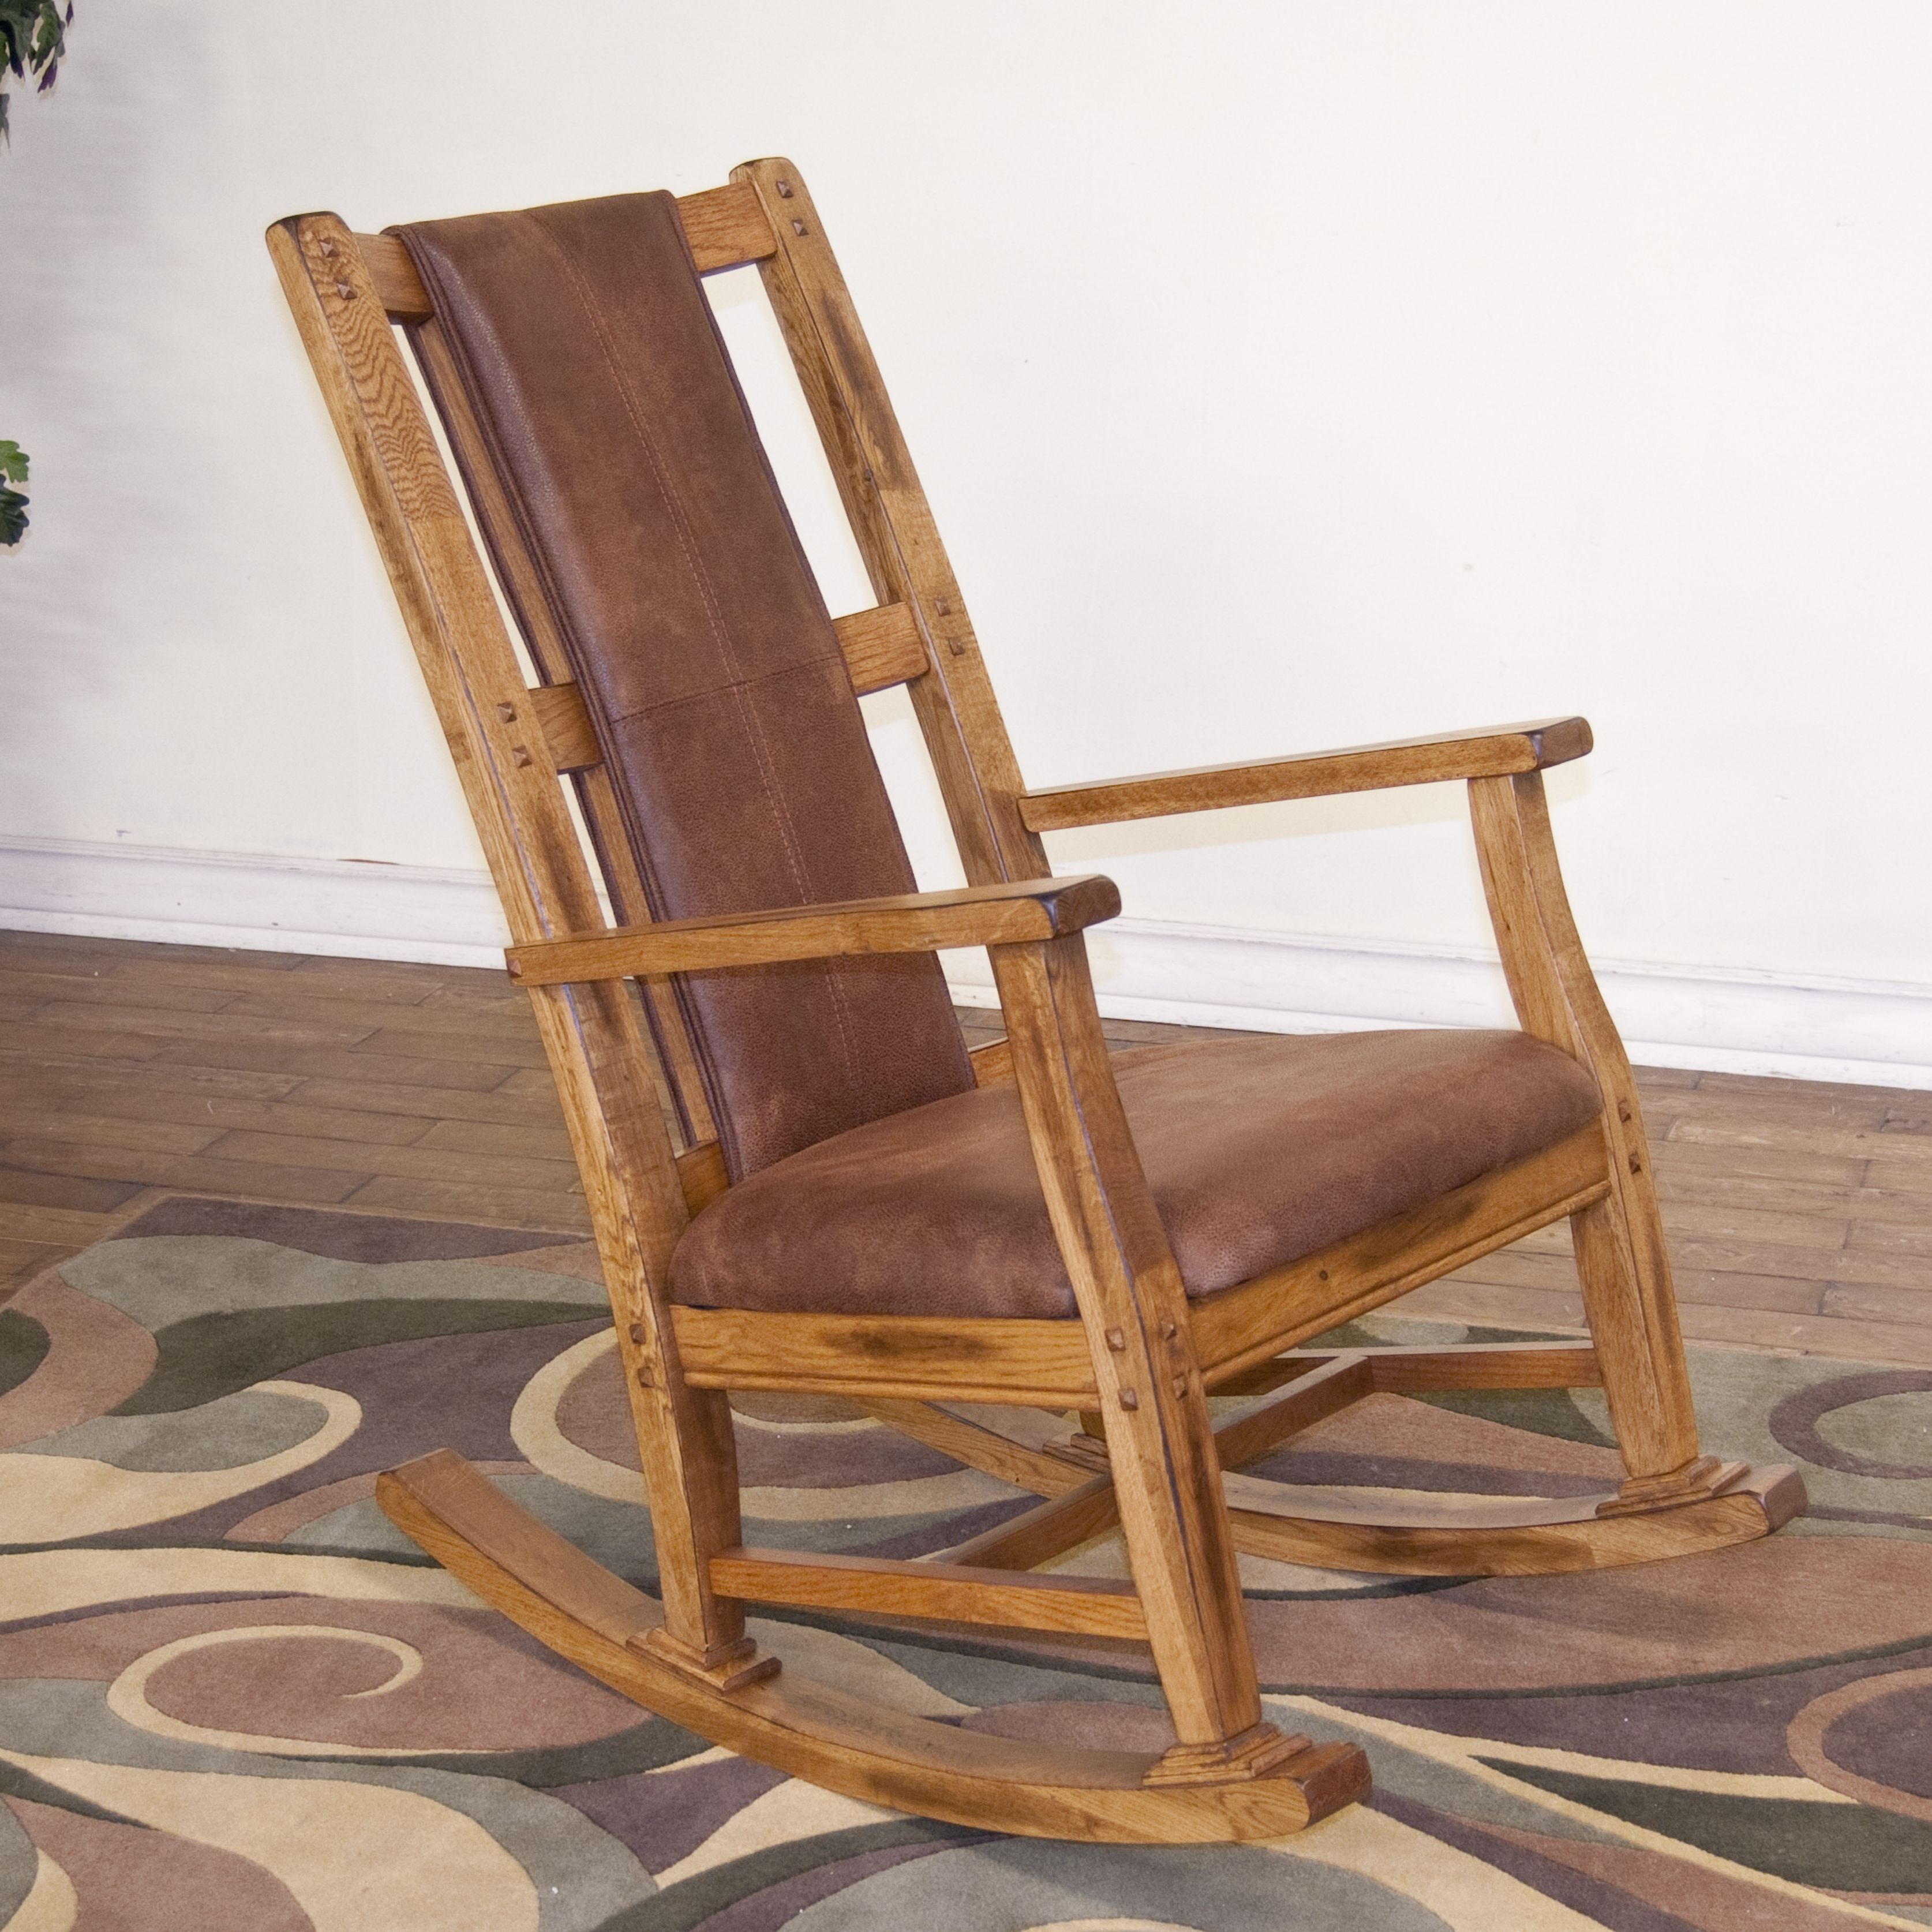 Widely Used Walmart Rocking Chairs Pertaining To Black Rocking Chairs Walmart F60x In Amazing Furniture Home Design (View 17 of 20)